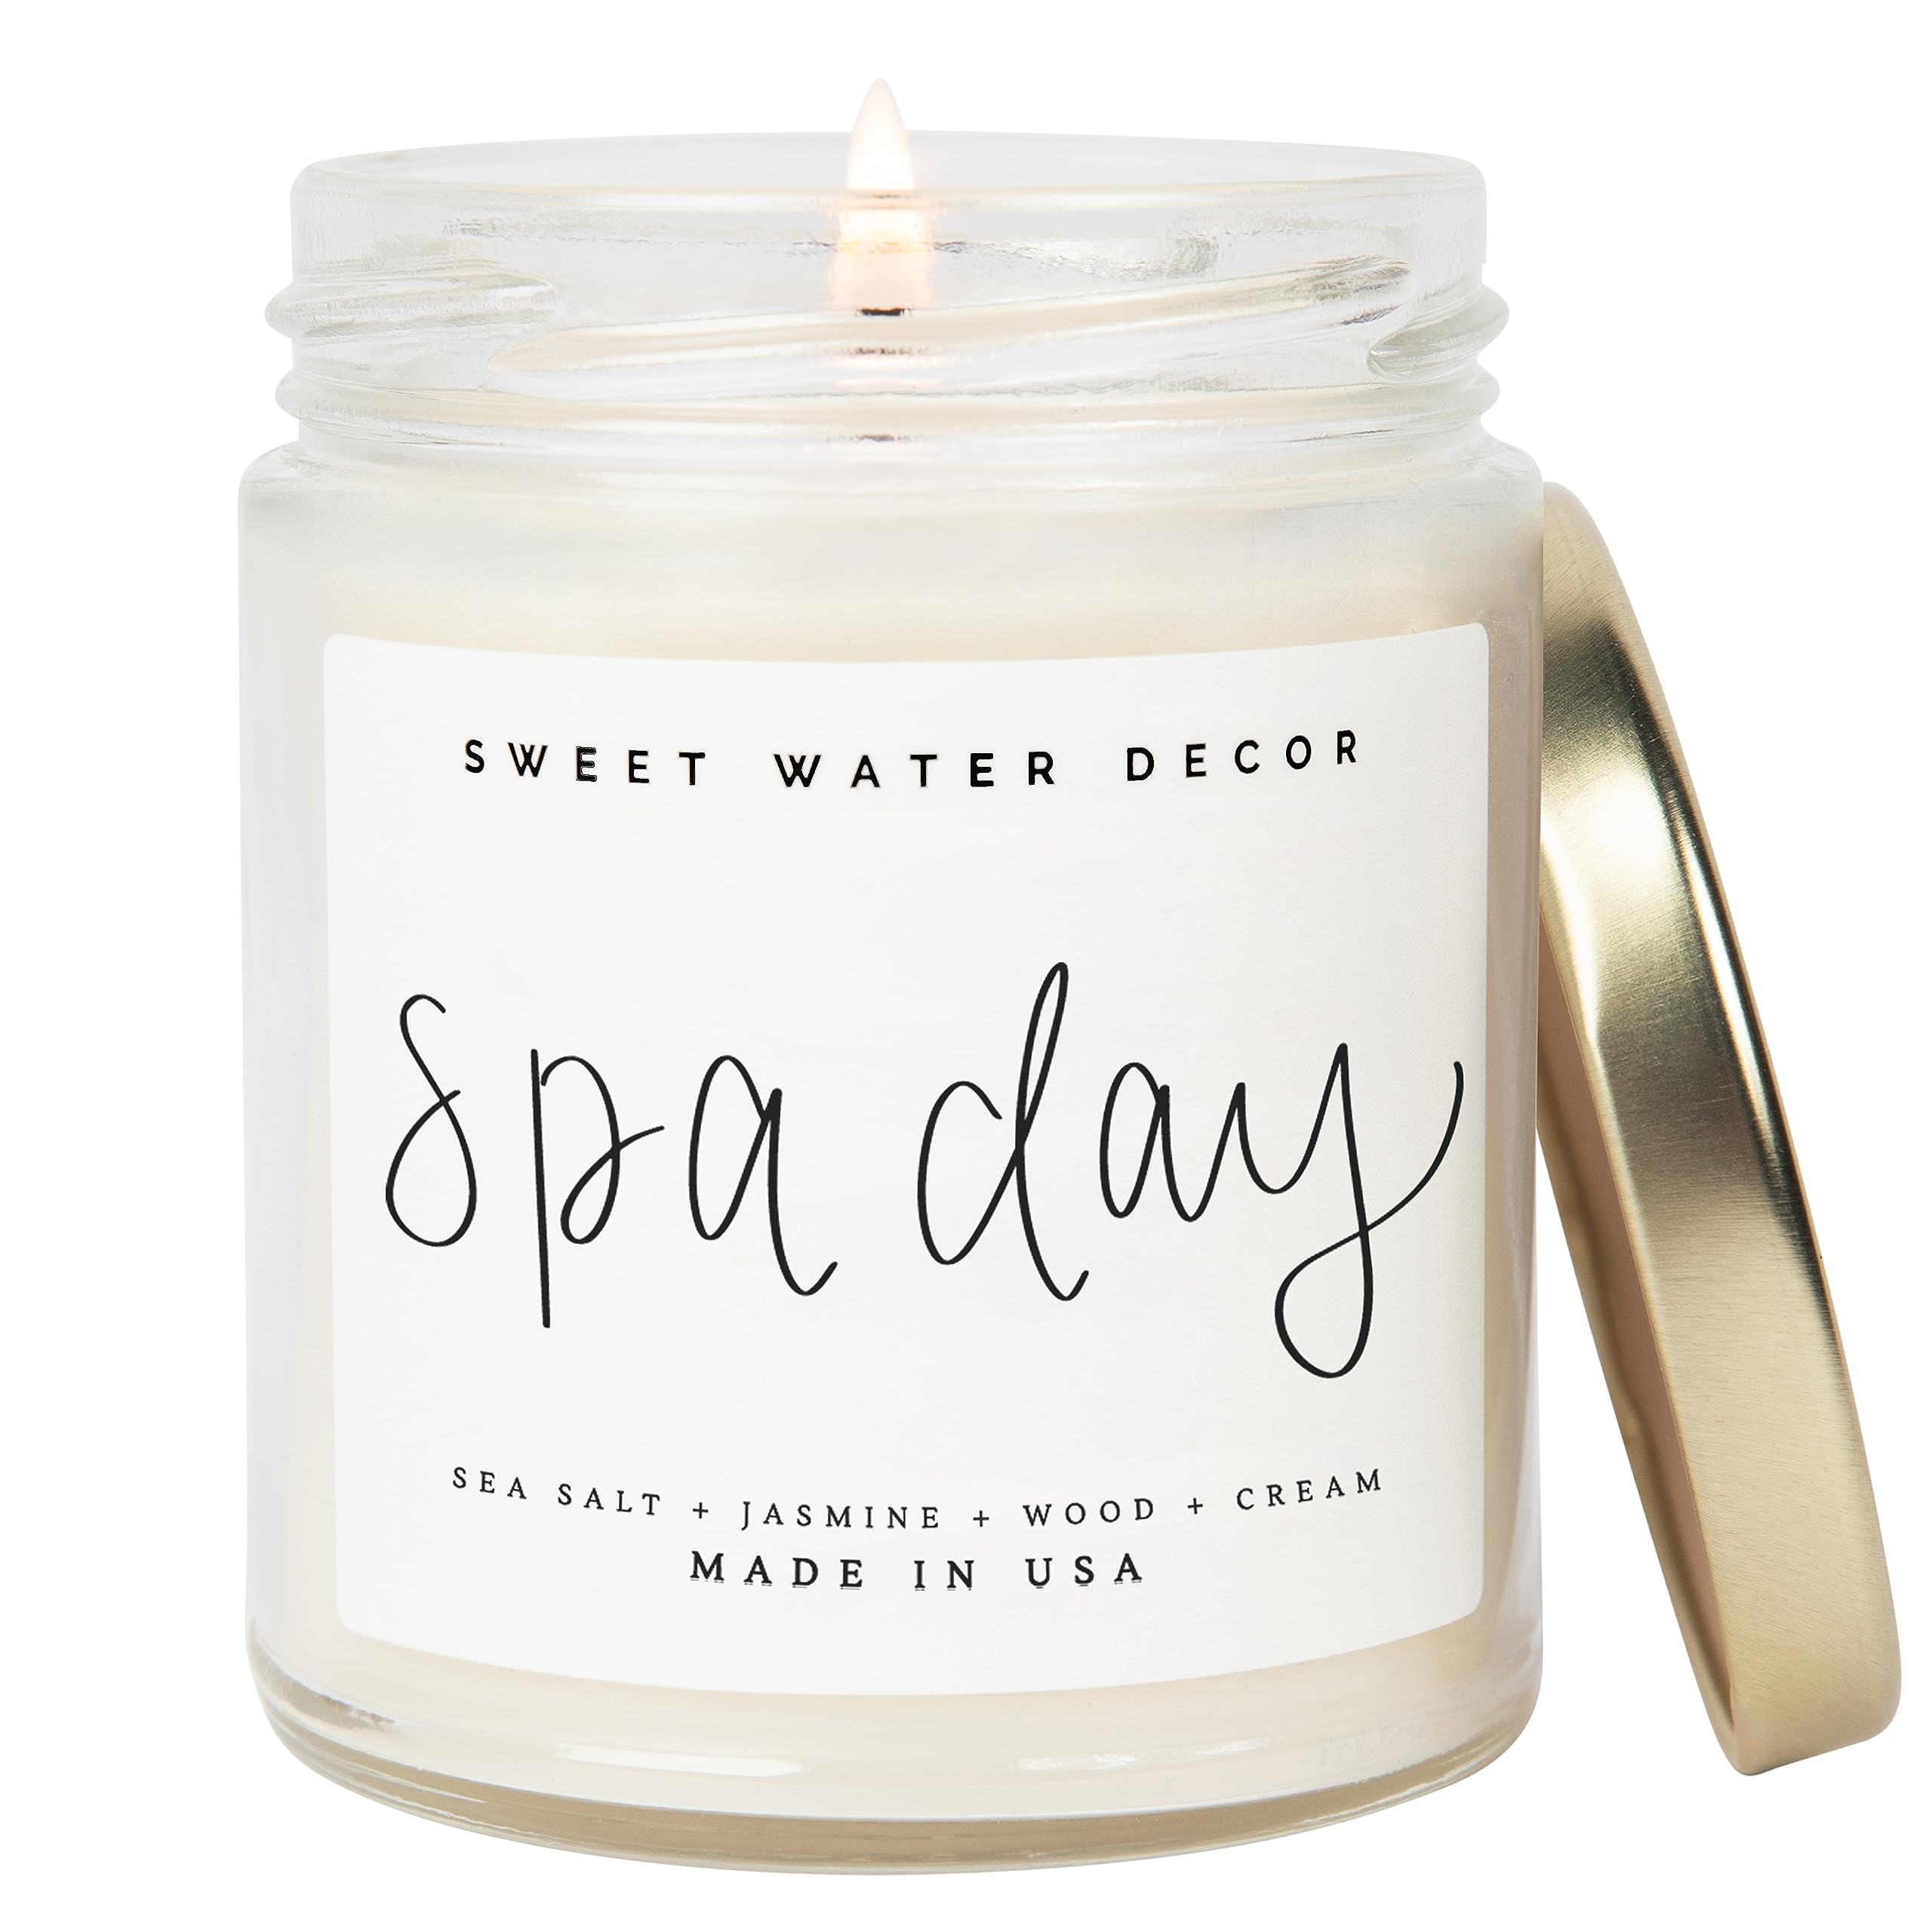 Sweet Water Decor Spa Day Candle